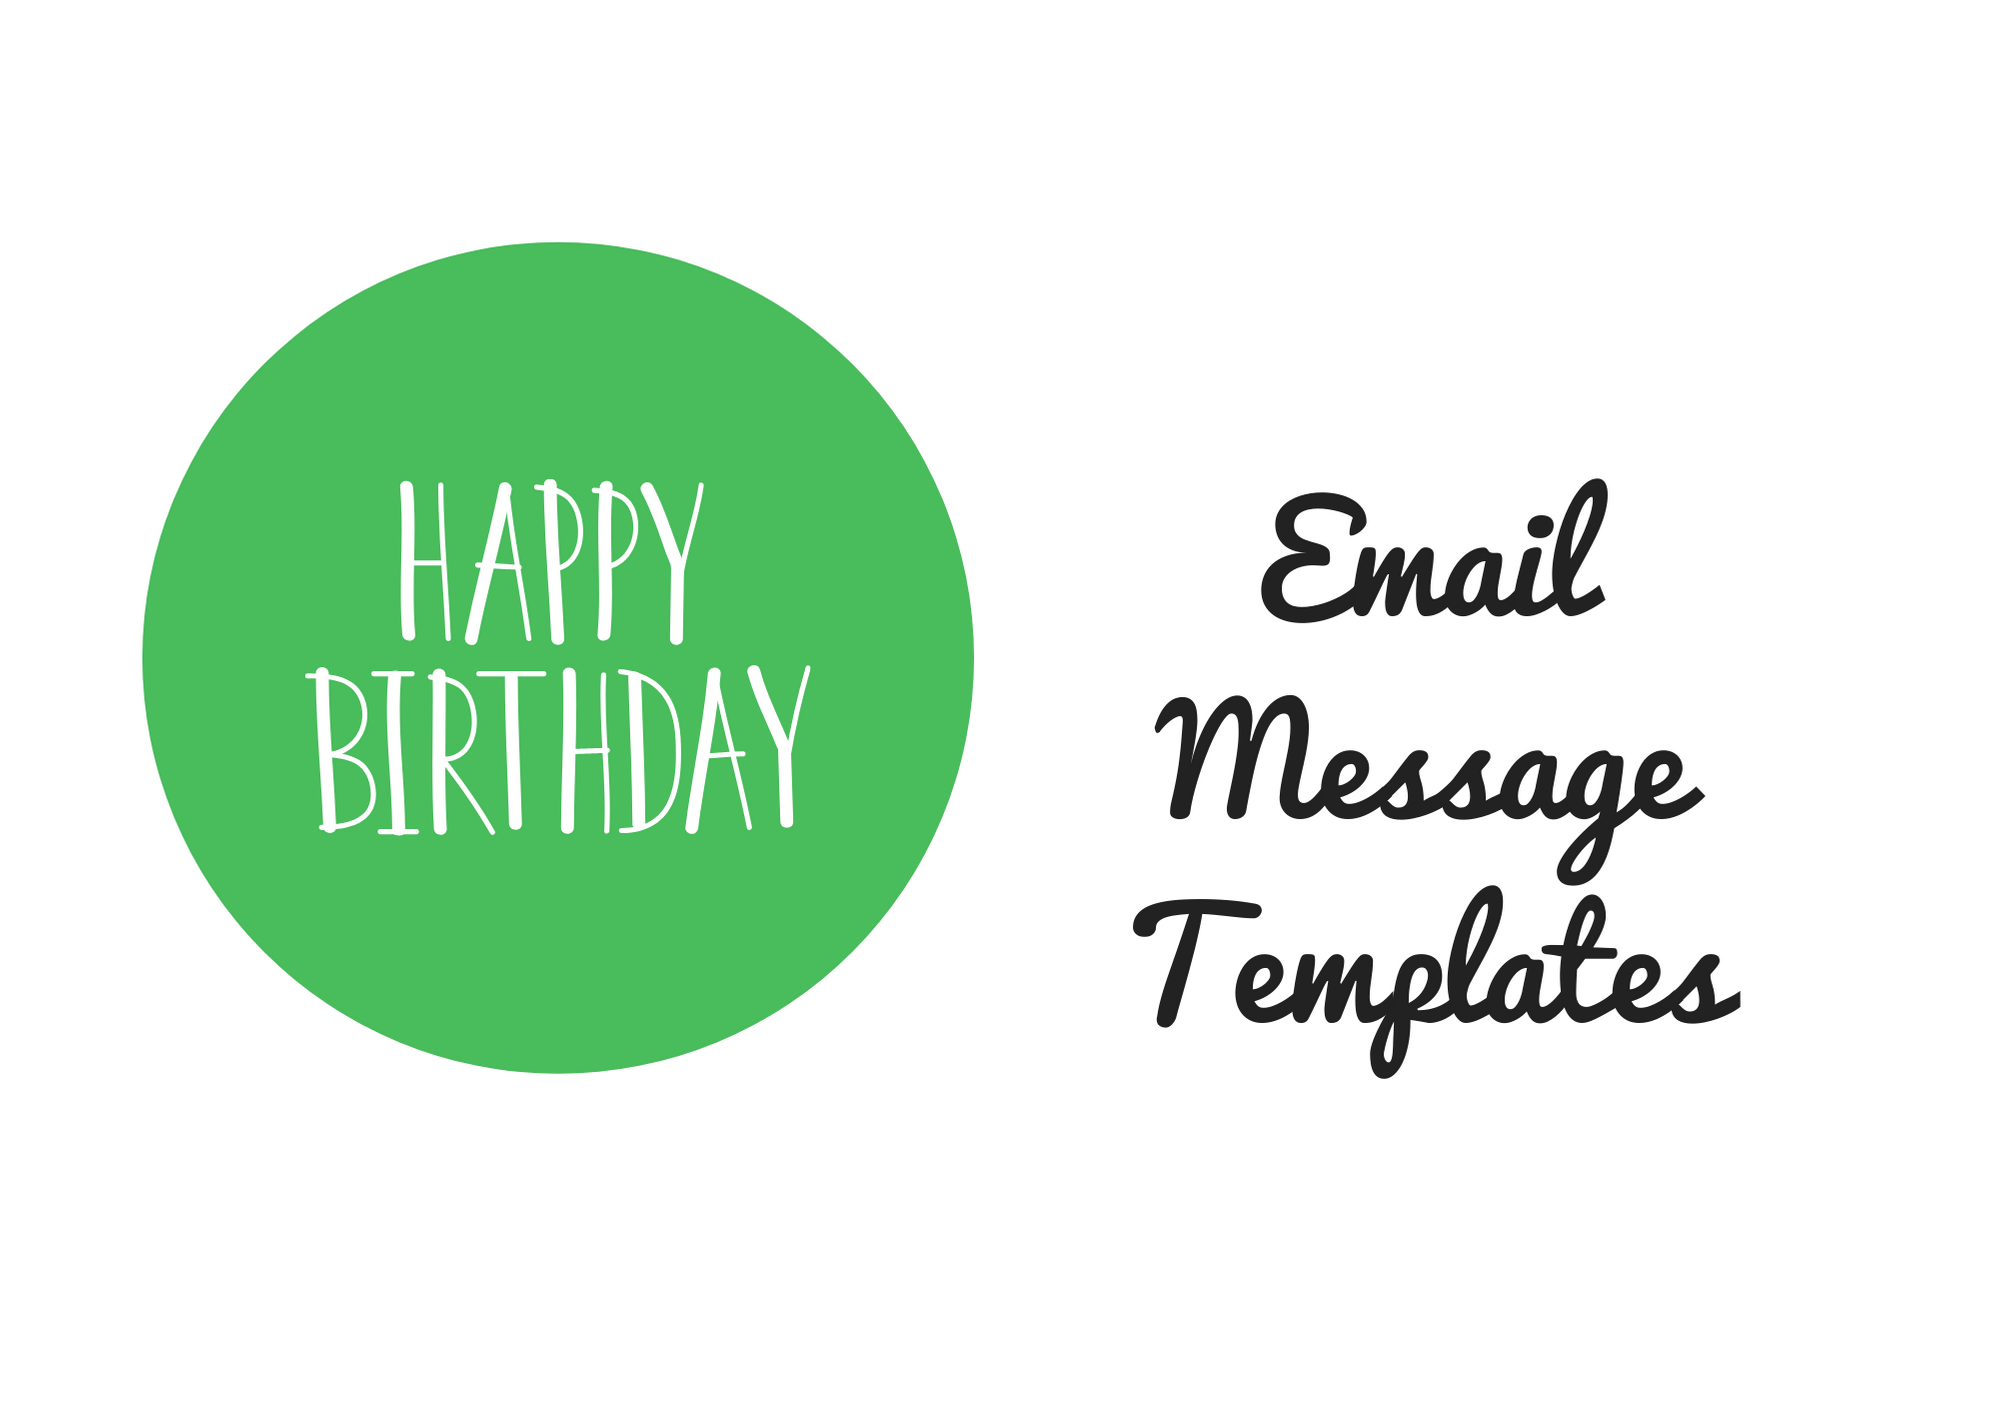 Cheers Video Mail message templates